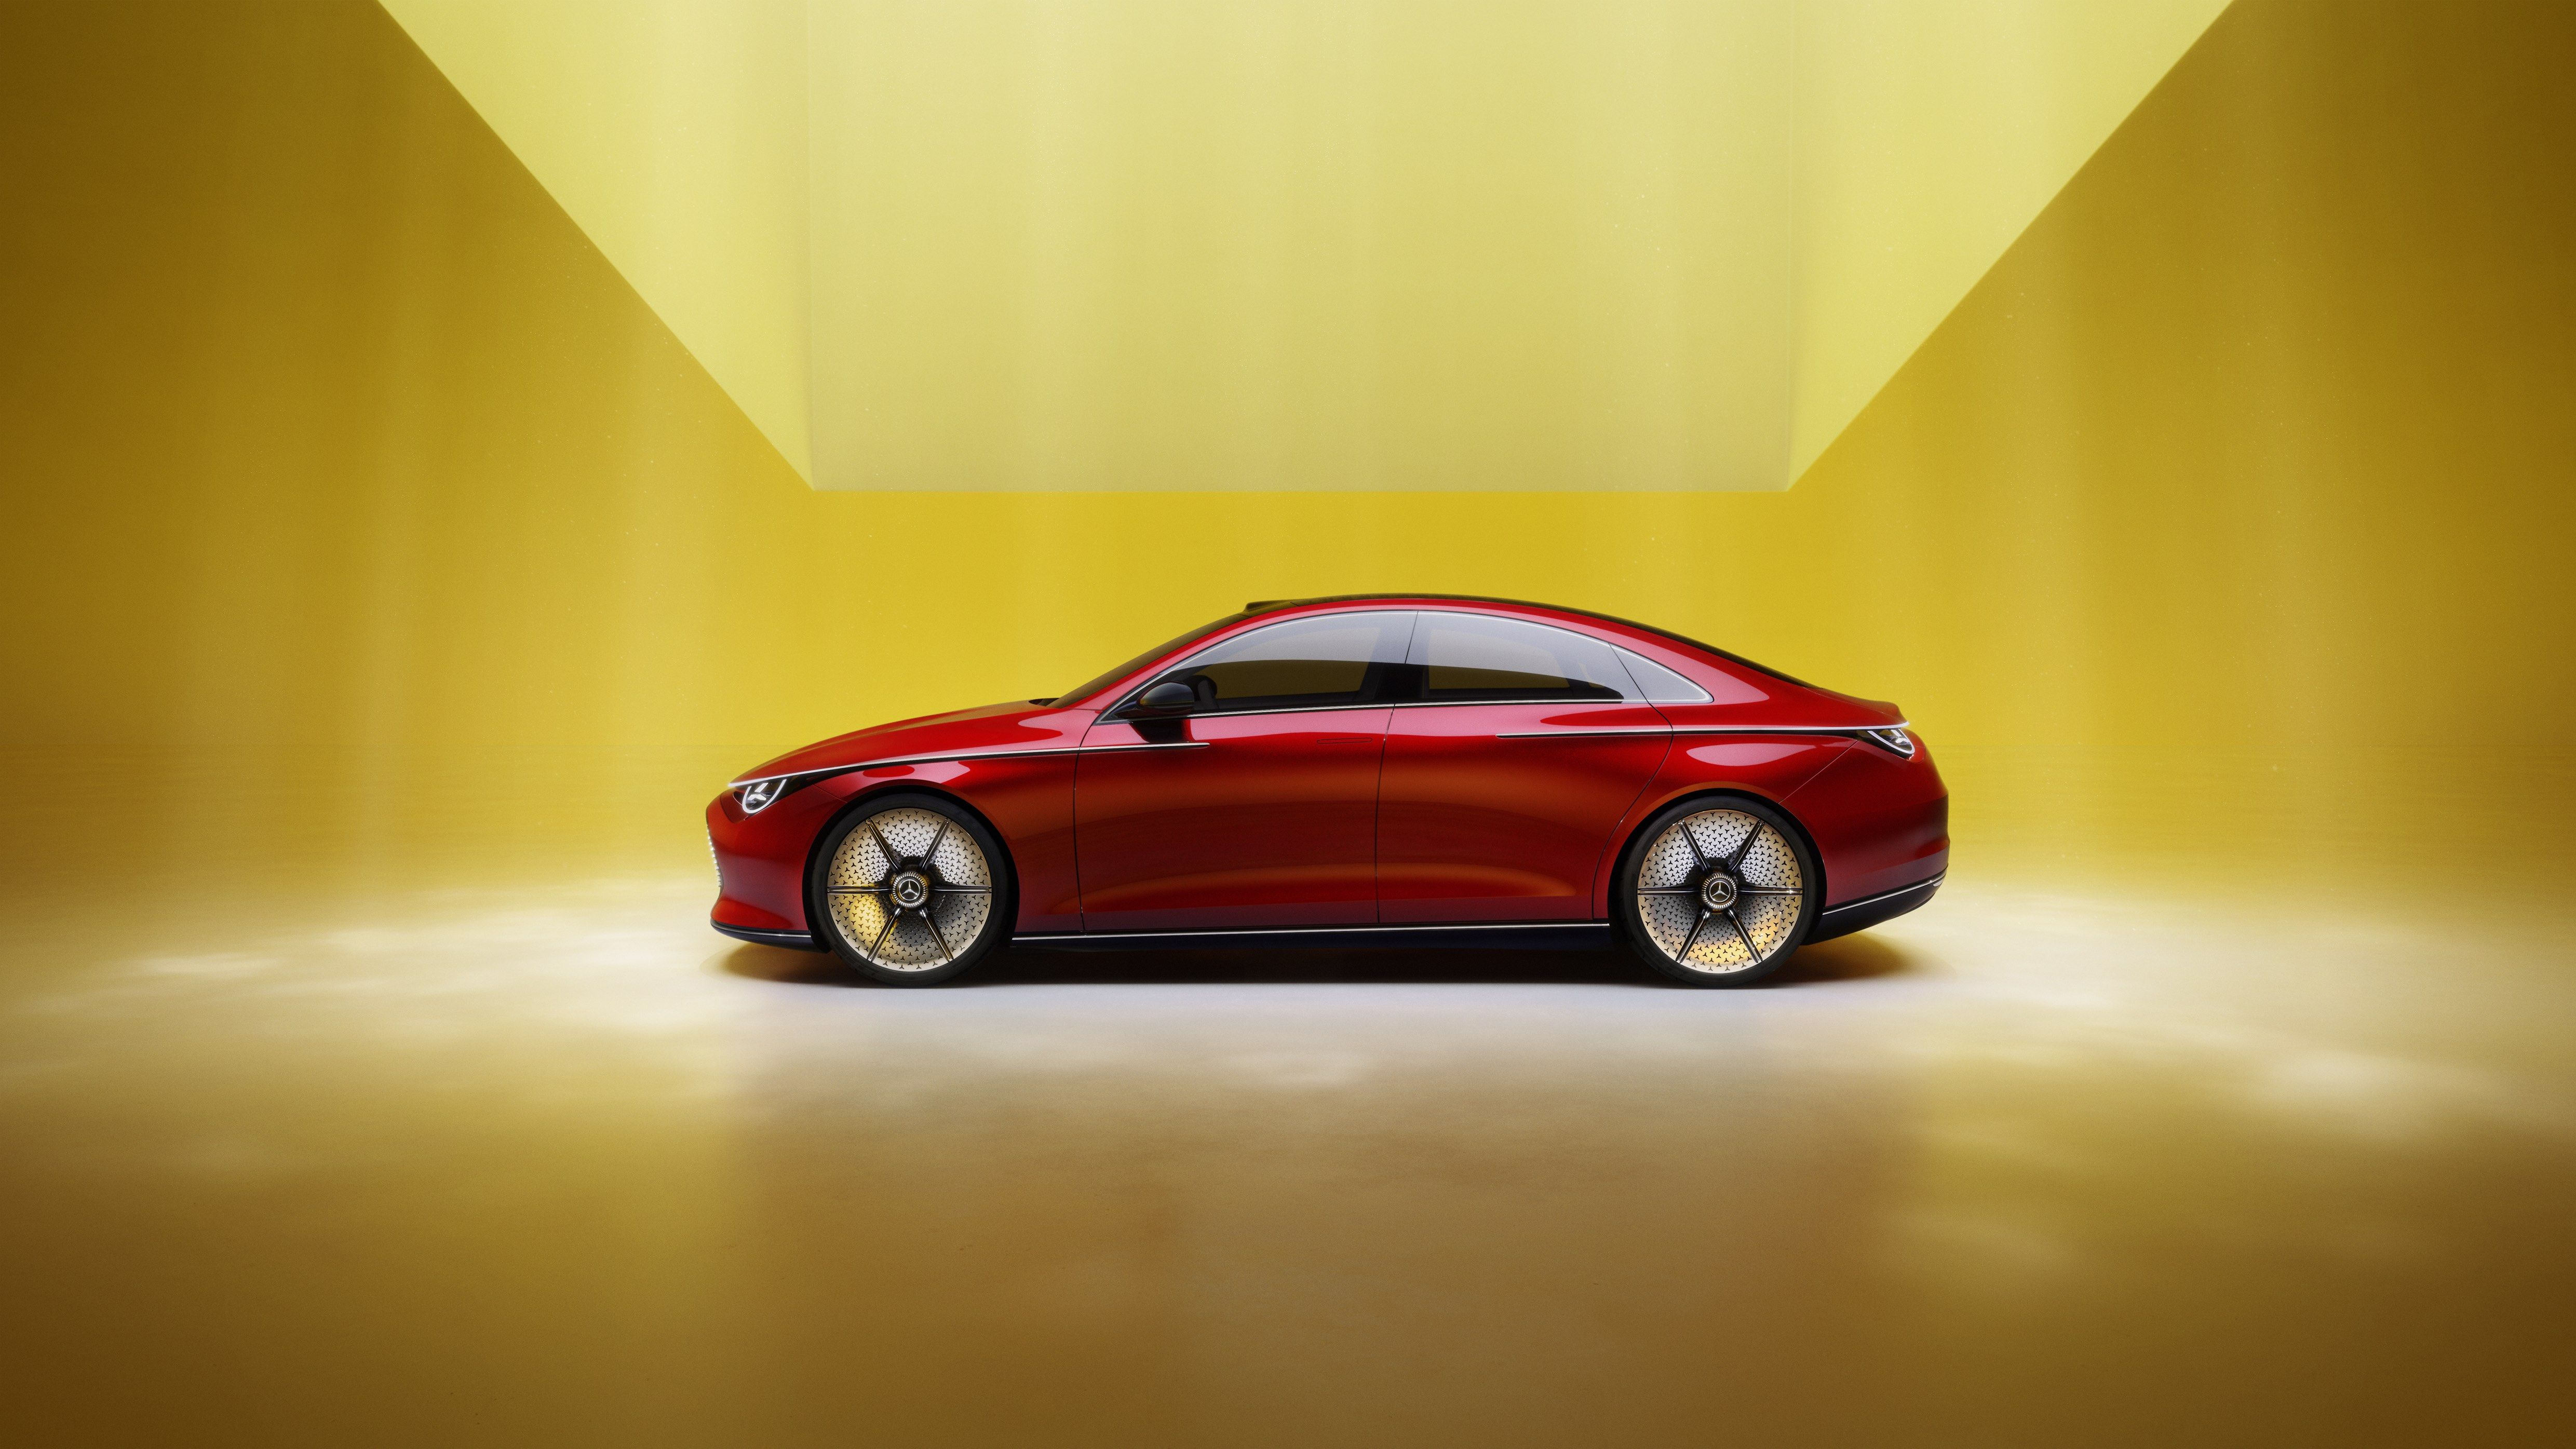 2025 Mercedes-Benz CLA imagined: Electric, petrol, and wagon!